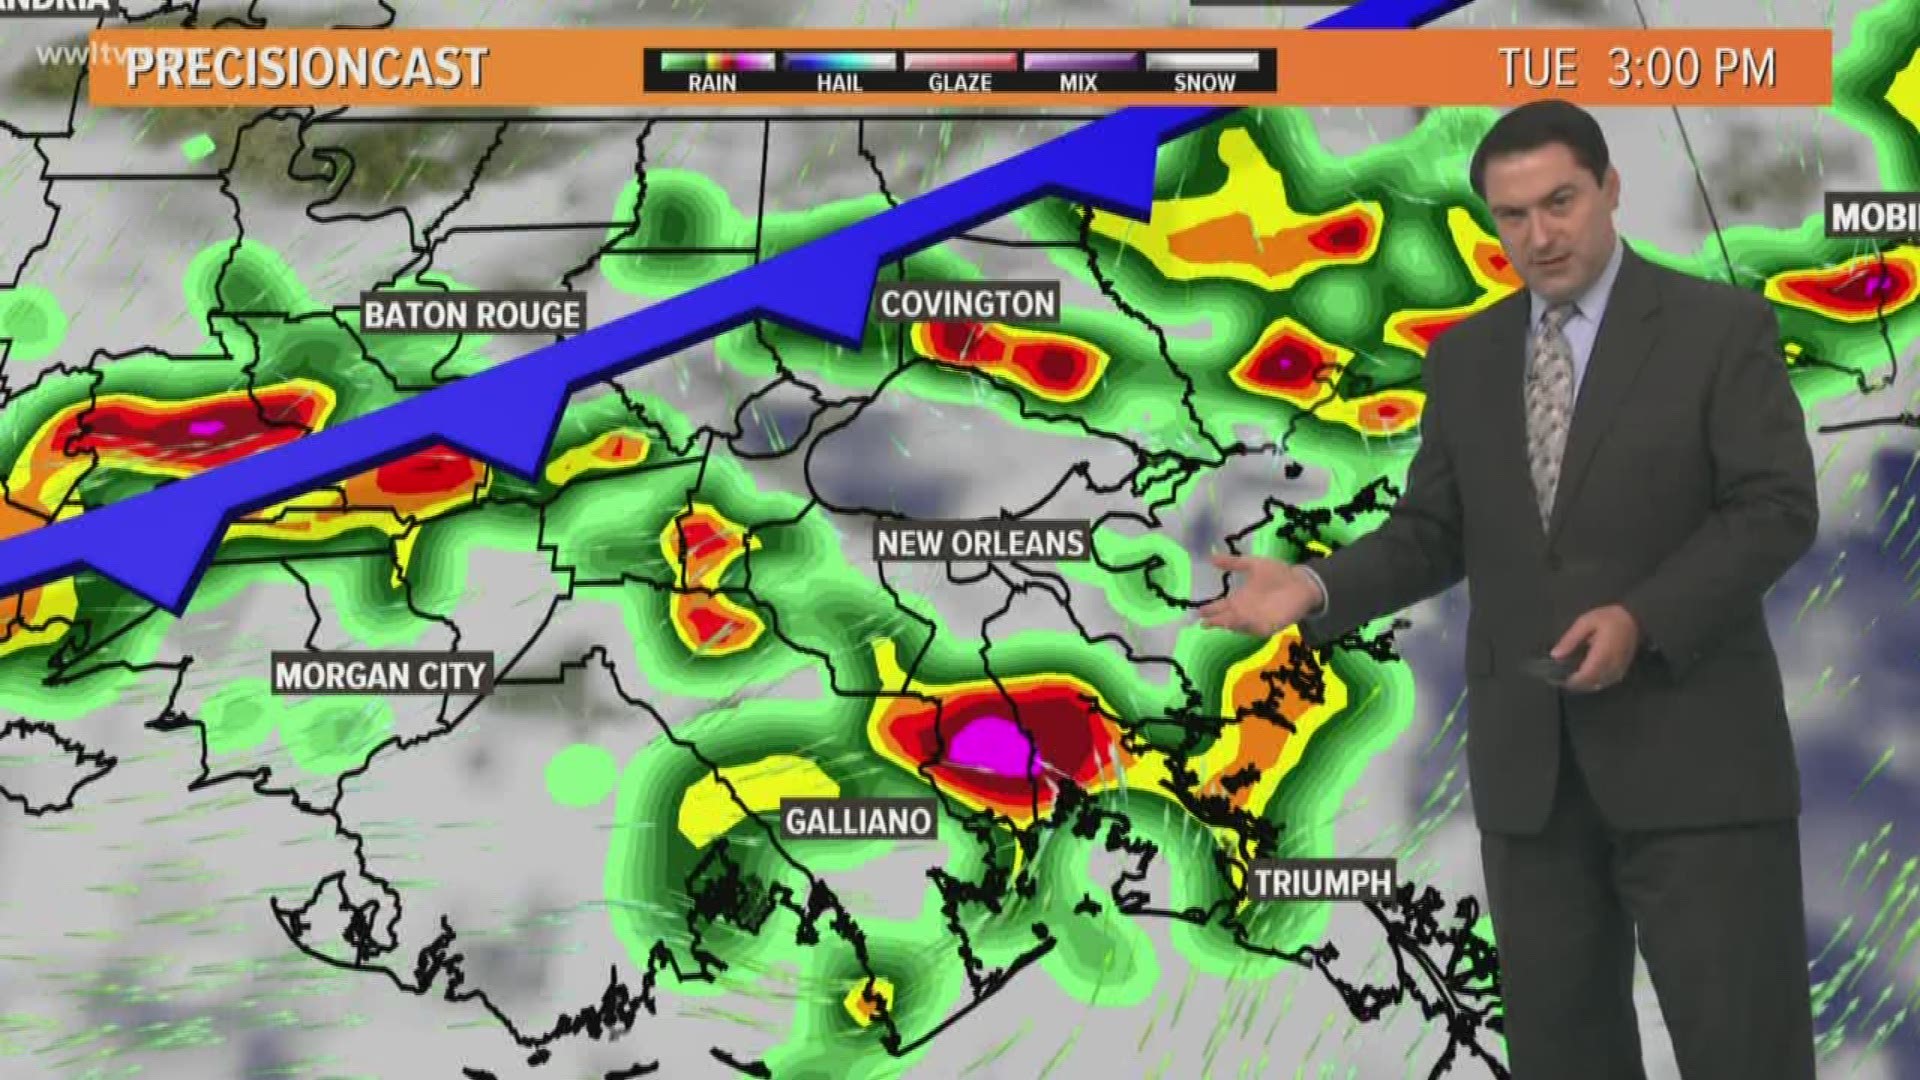 Meteorologist Dave Nussbaum says a rare July cold front will bring us storms with heavy rain today. Then it will become less humid the next few days as the front stalls in the Gulf. Plus, Dave says there is a chance a low could form along the front in the Gulf.